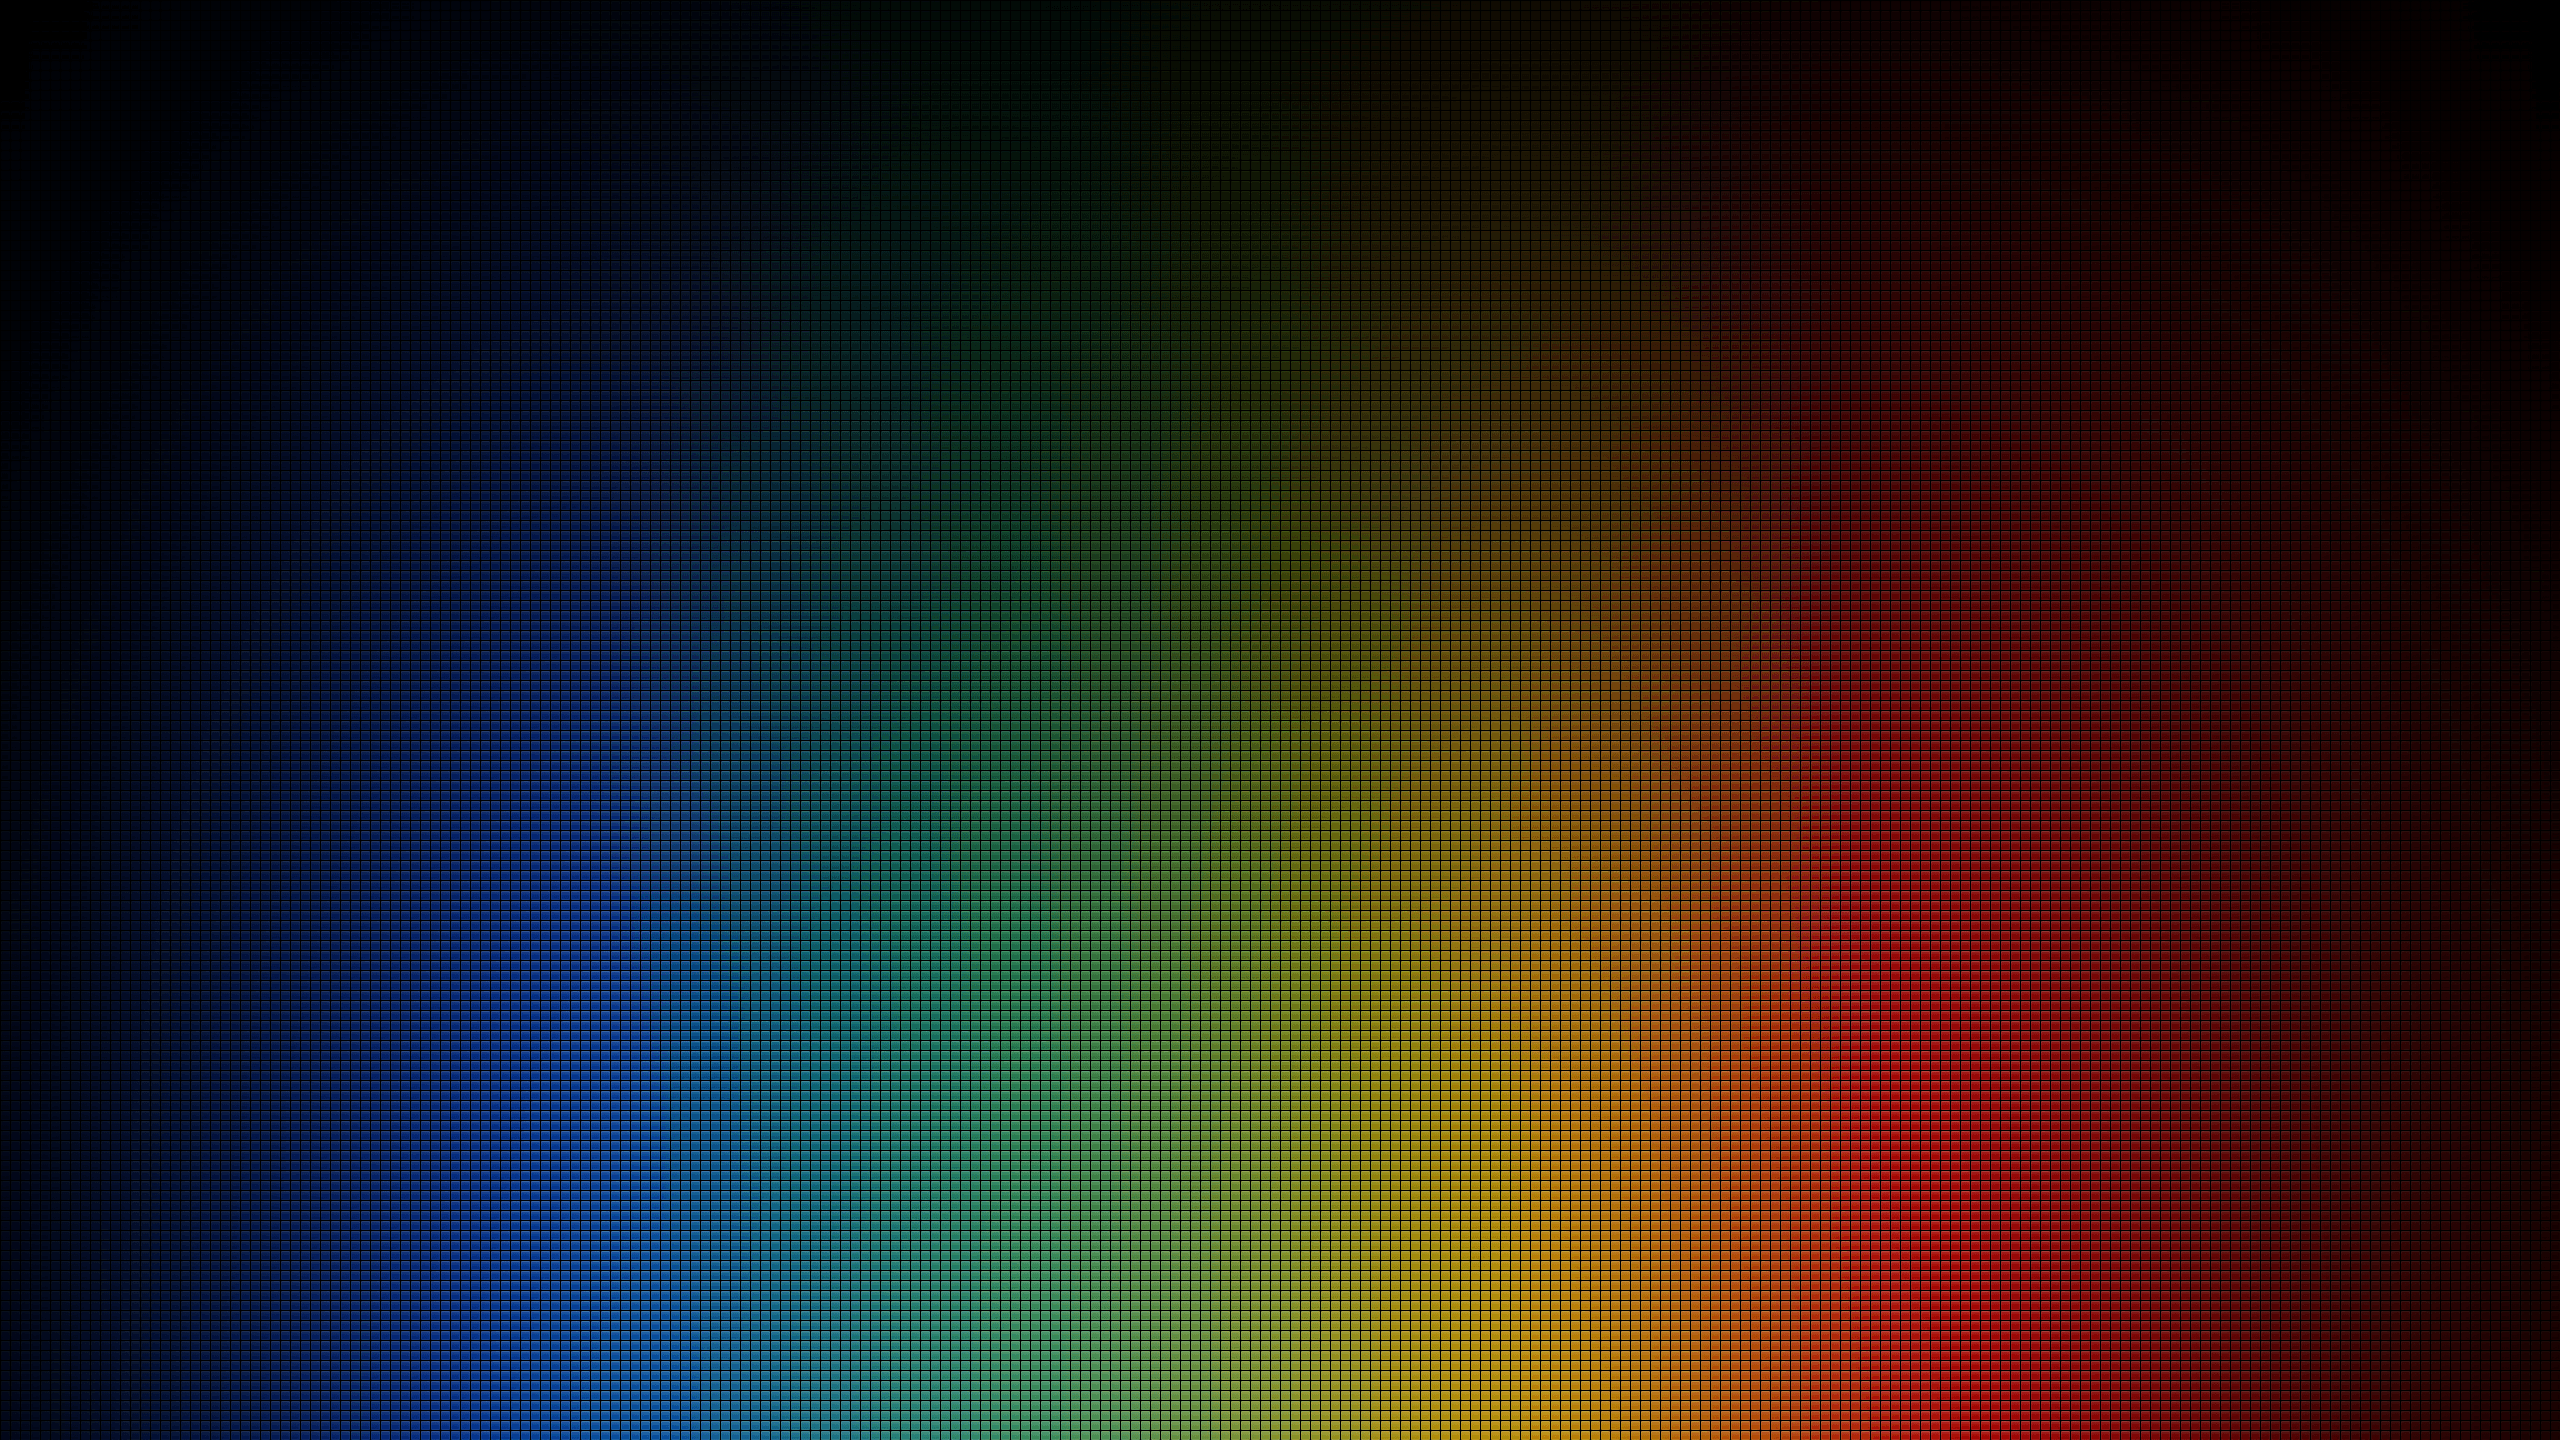 #Gradient, , #Rainbow, #Colorful, #Tiles. Abstract wallpaper